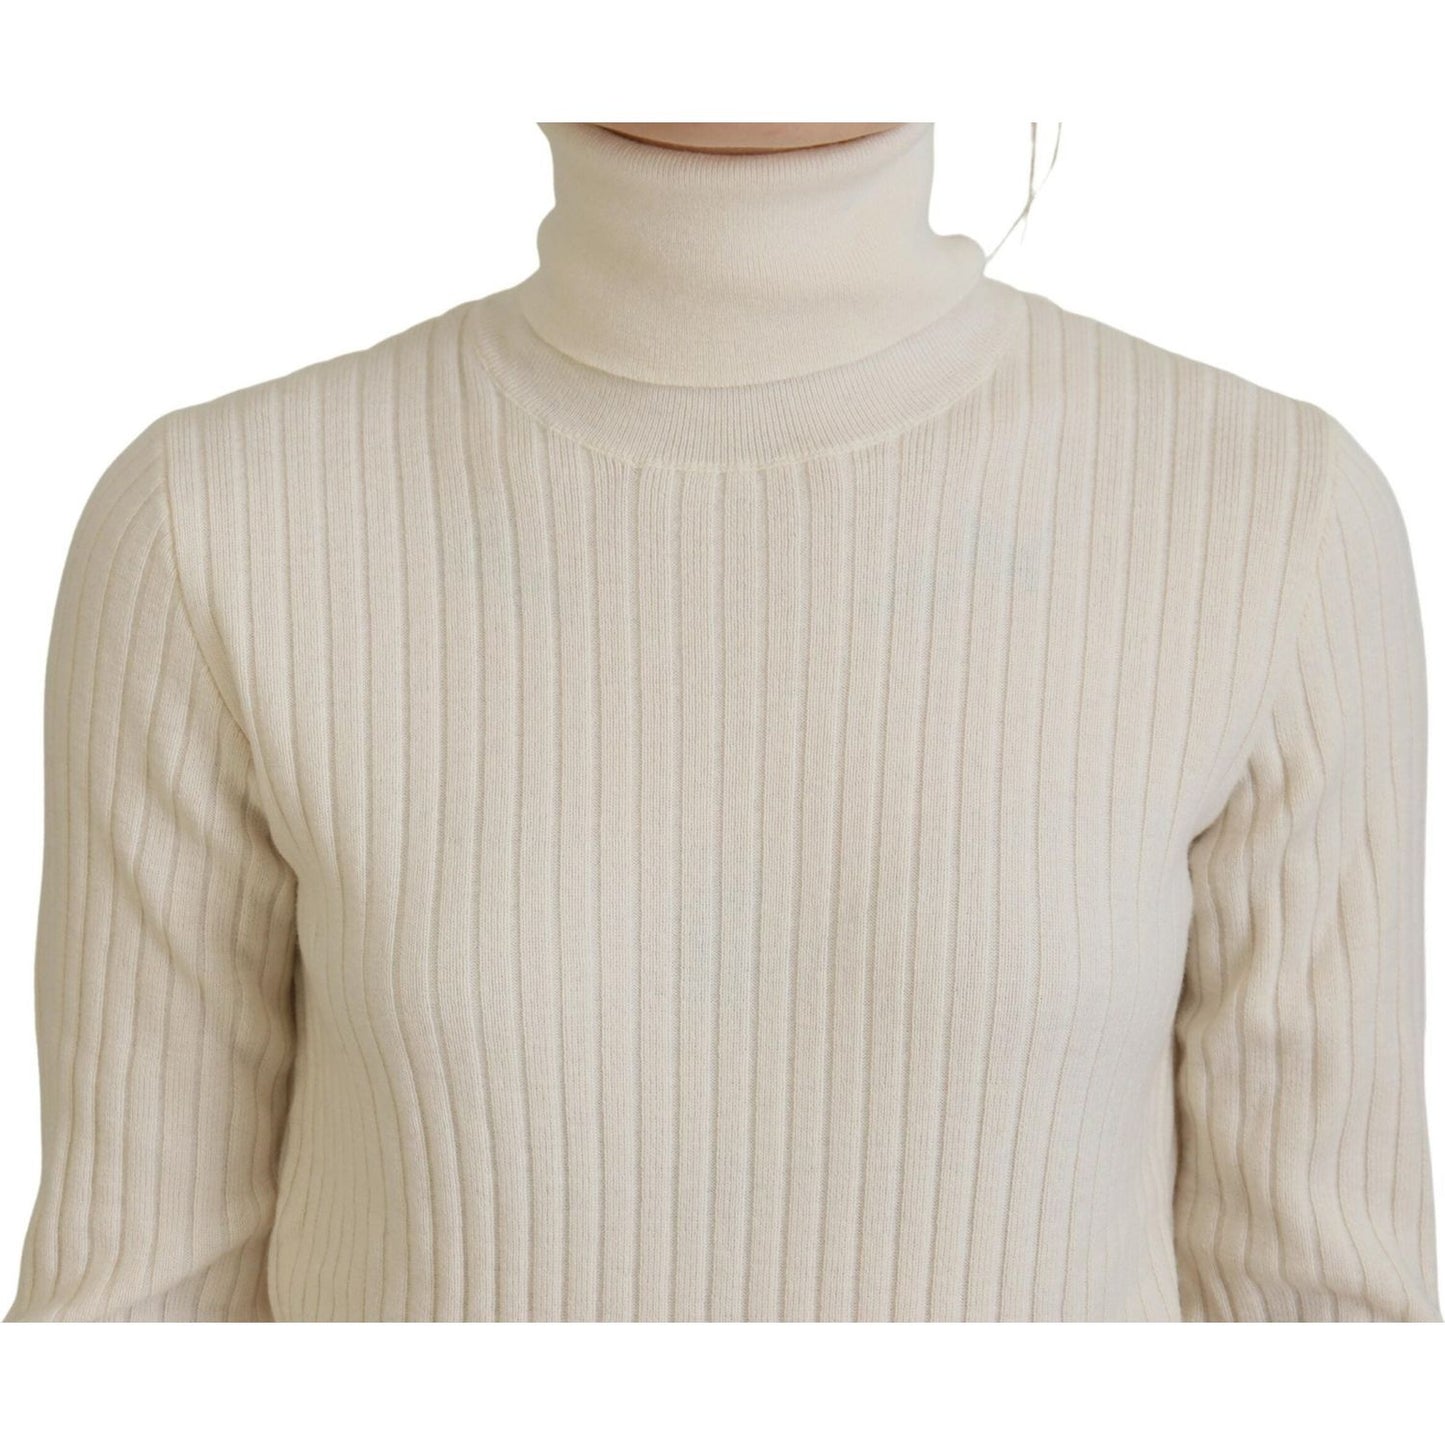 Dolce & Gabbana Ivory Turtleneck Wool Blend Sweater ivory-turtleneck-distressed-cuff-pullover-sweater